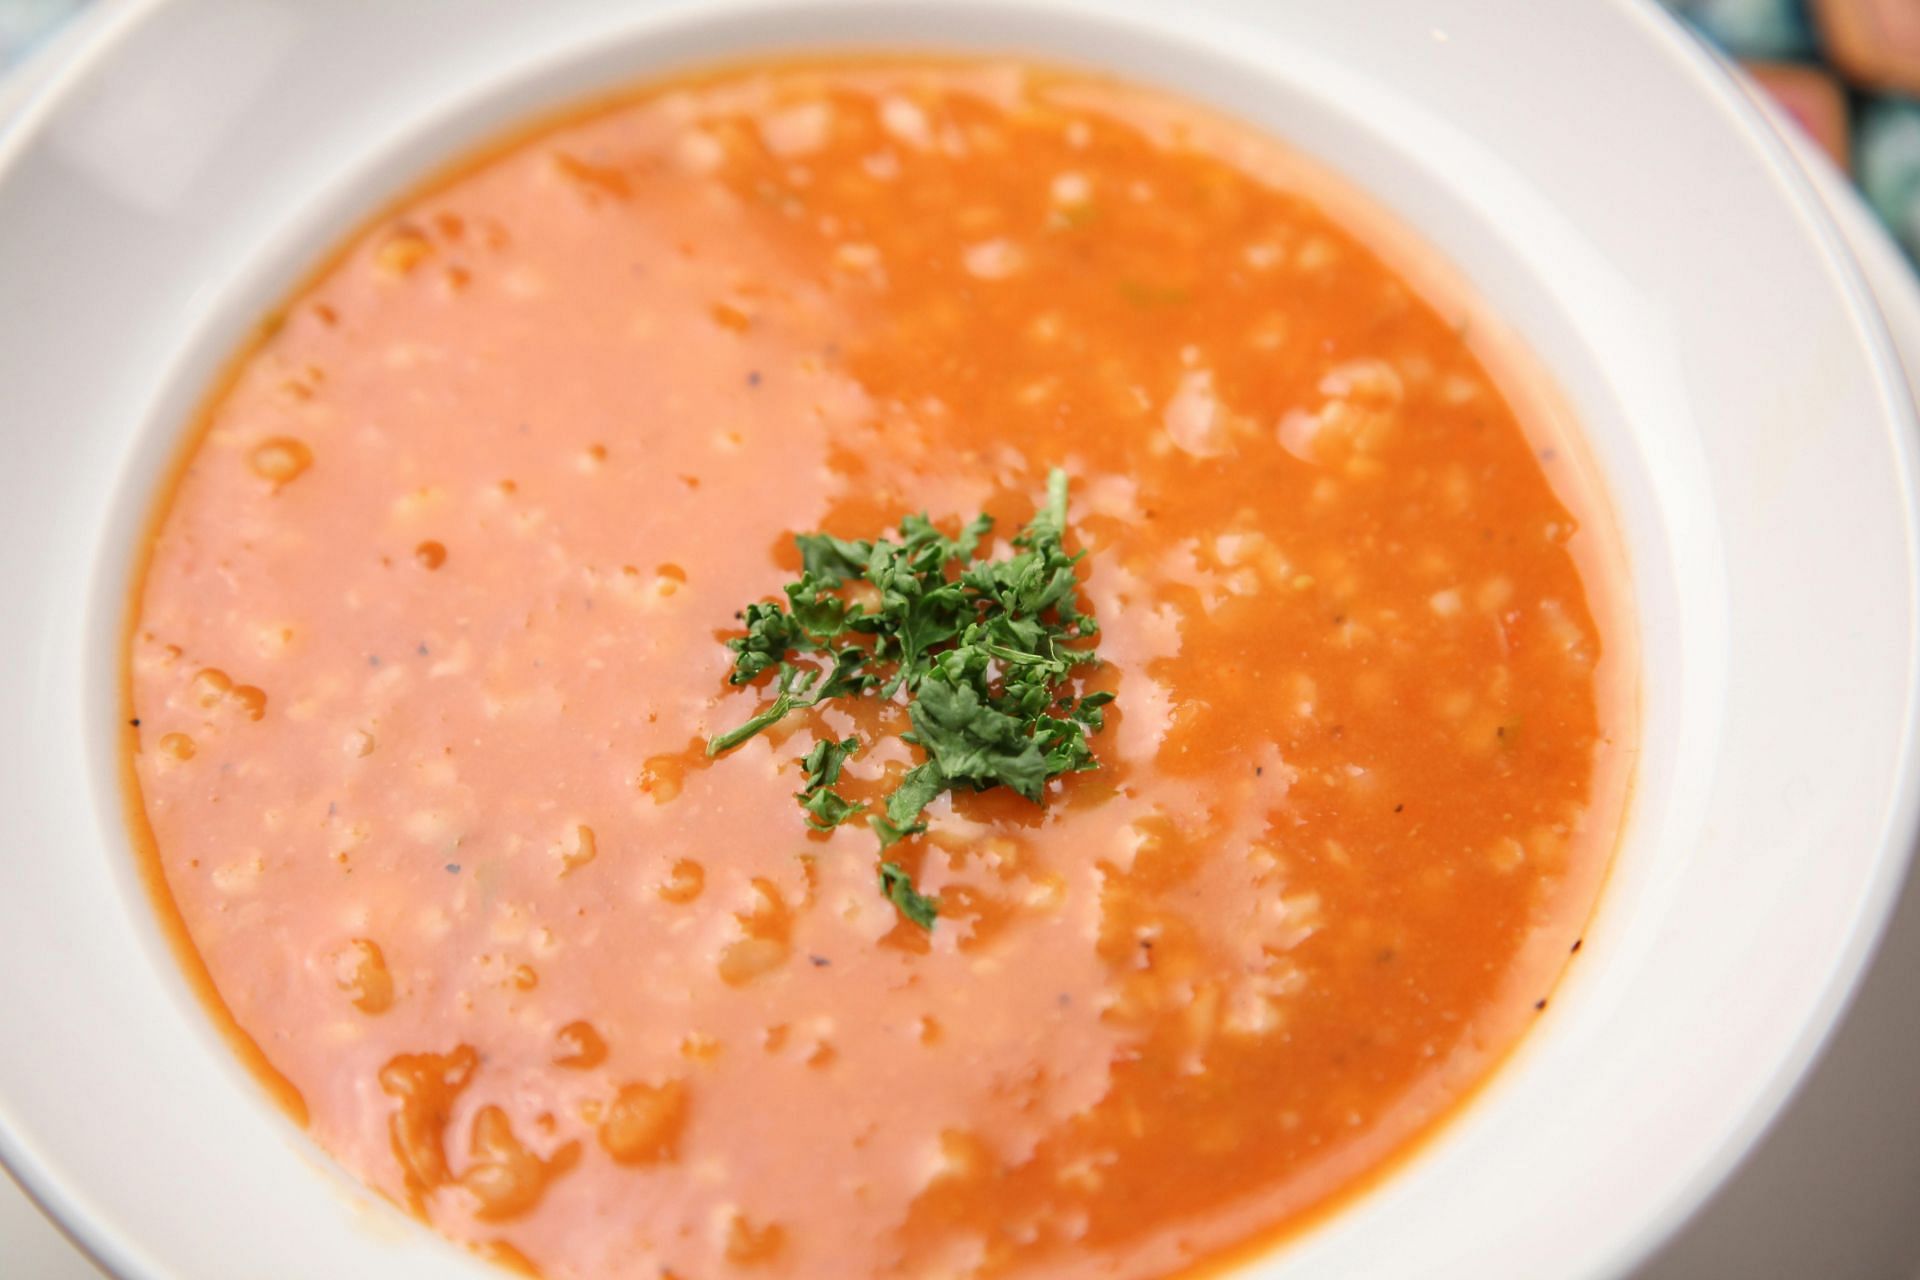 benefits of souping (image sourced via Pexels / Photo by zak)